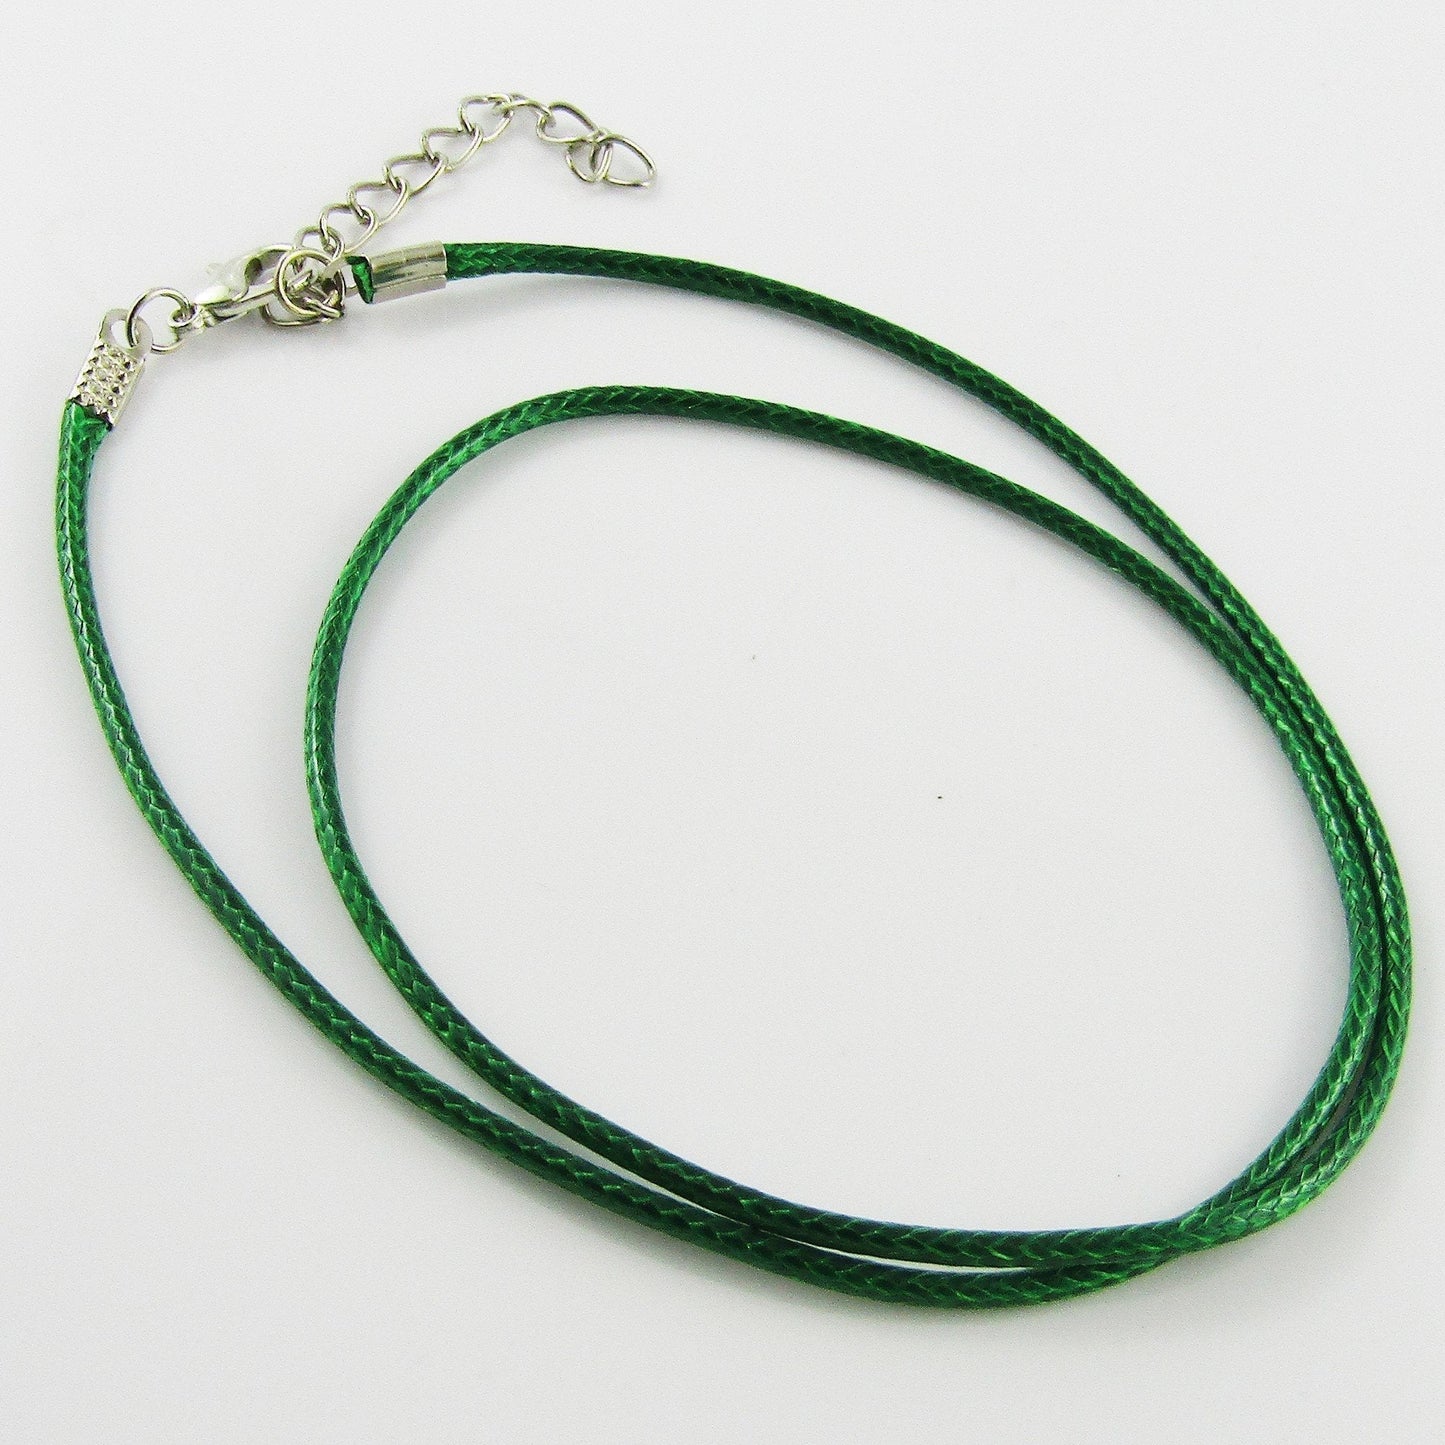 Bulk Pack 10pcs 2mm Green Cord Necklace 44cm with 5cm Extender